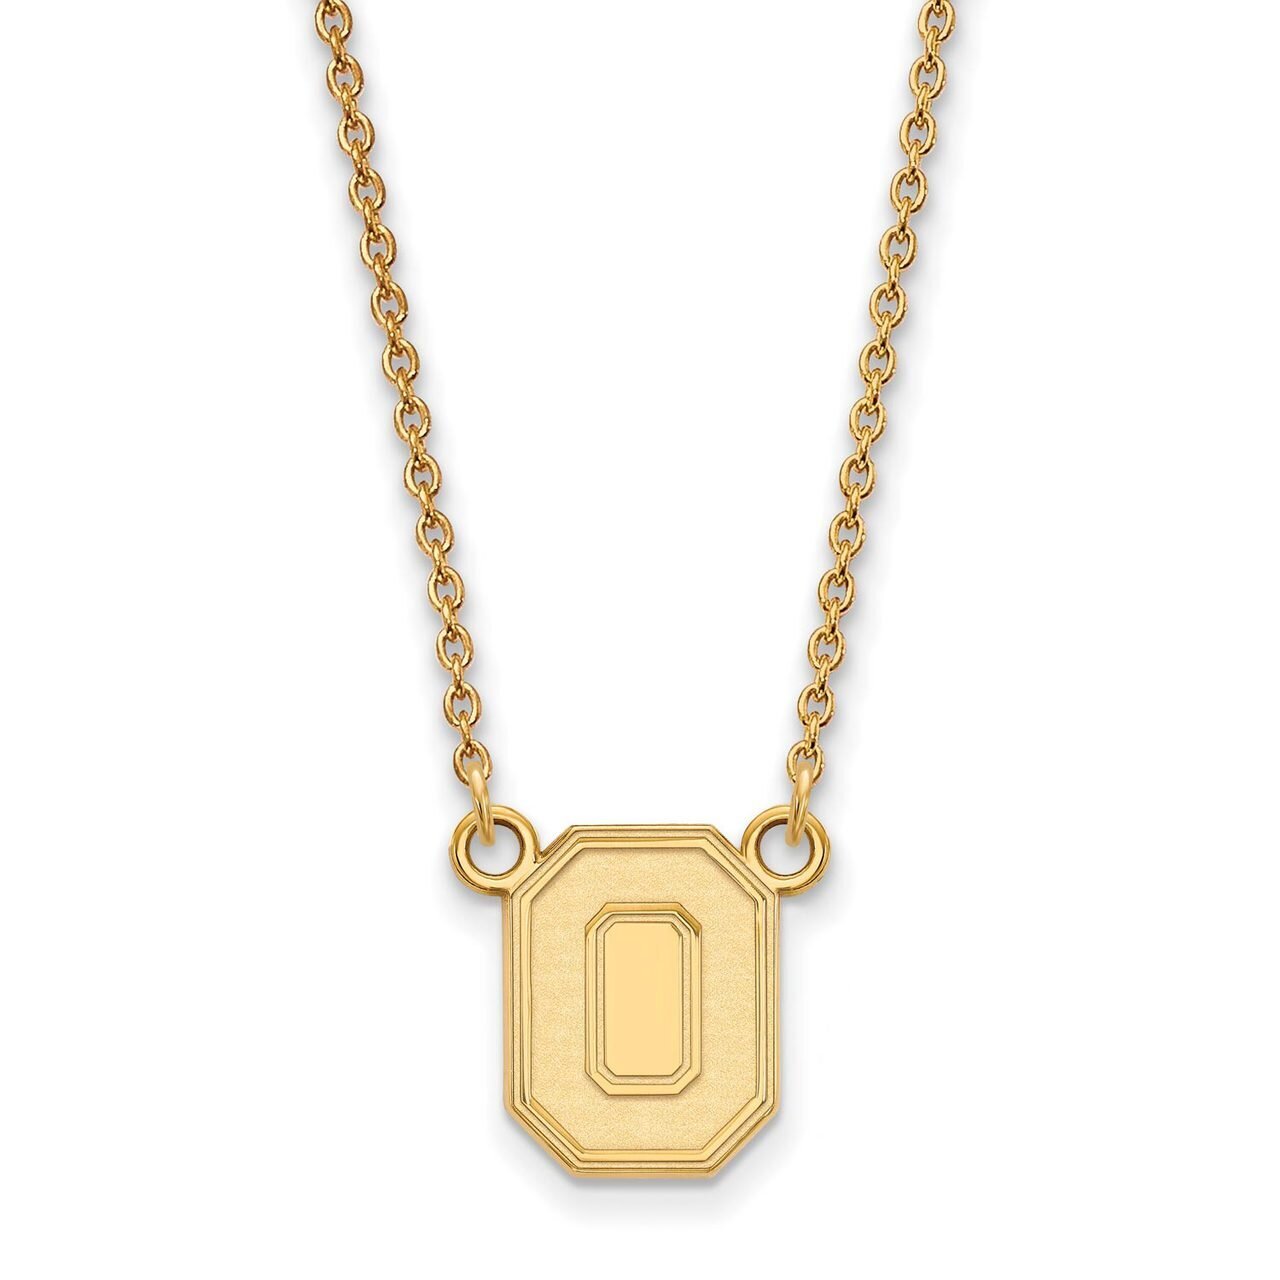 Ohio State University Small Pendant with Chain Necklace 14k Yellow Gold 4Y053OSU-18